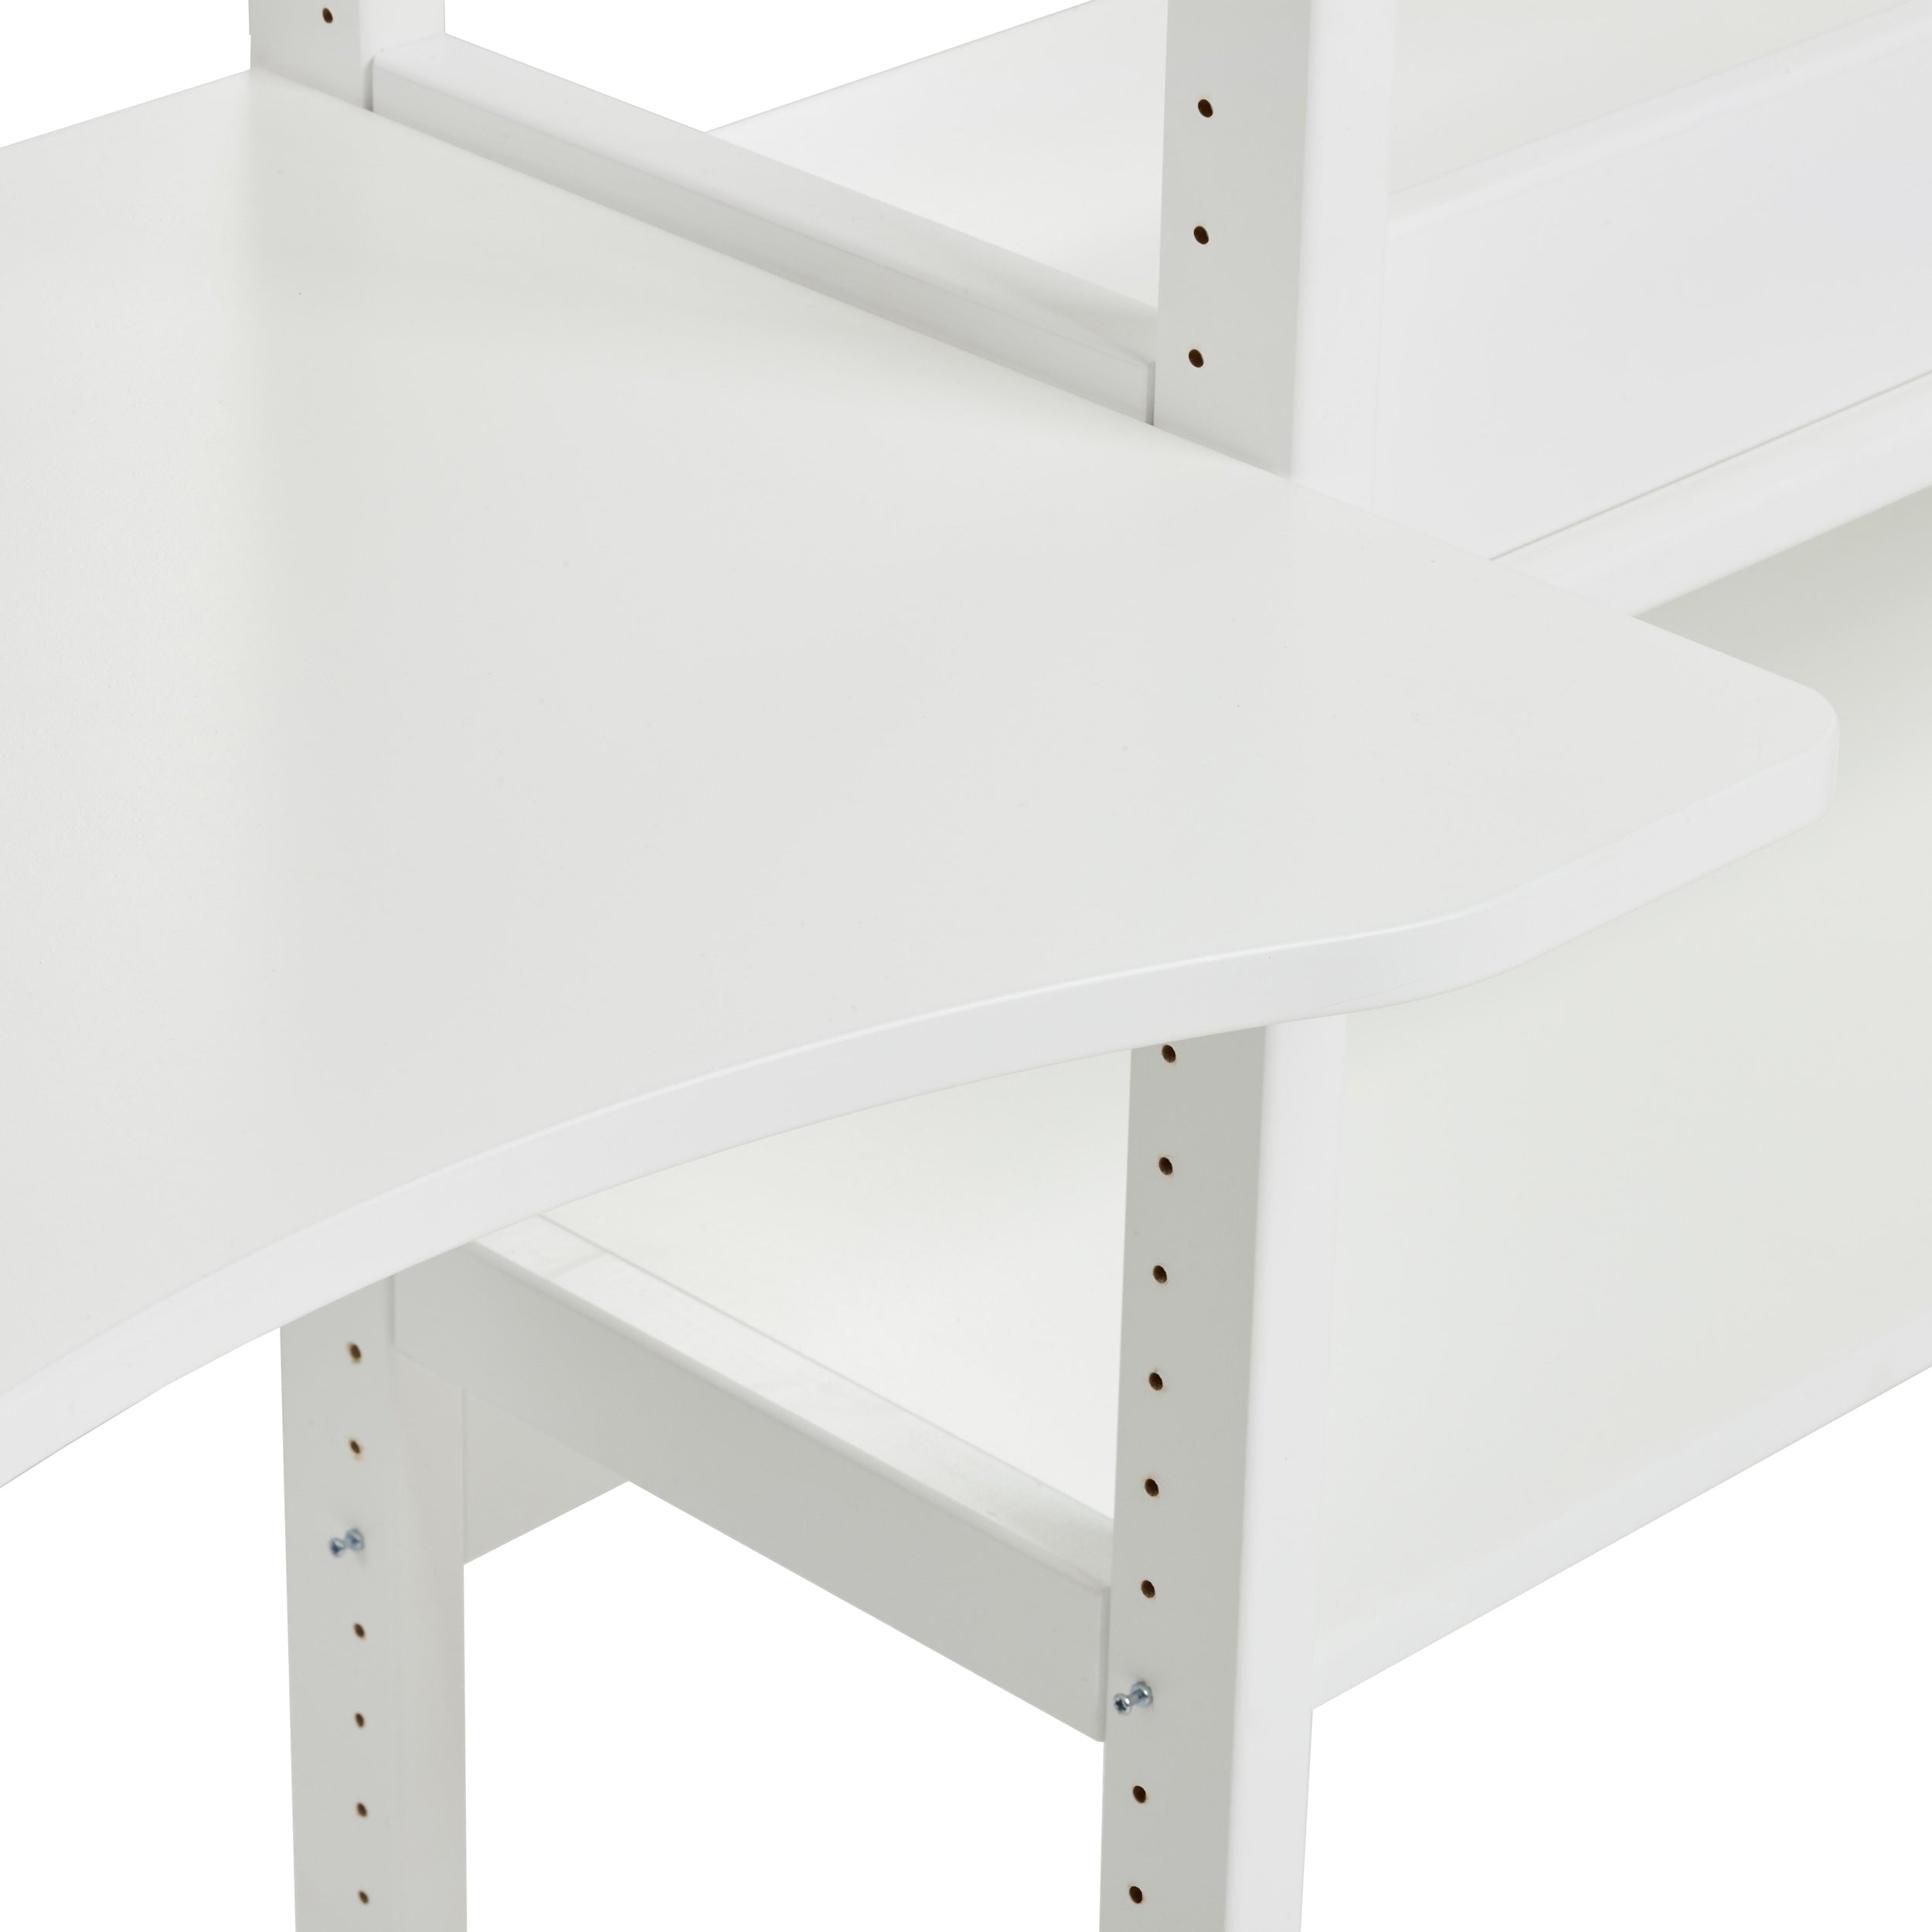 Hoppekids STOREY shelf with 3 sections, 14 shelves, and a writing desk in 80 cm, White